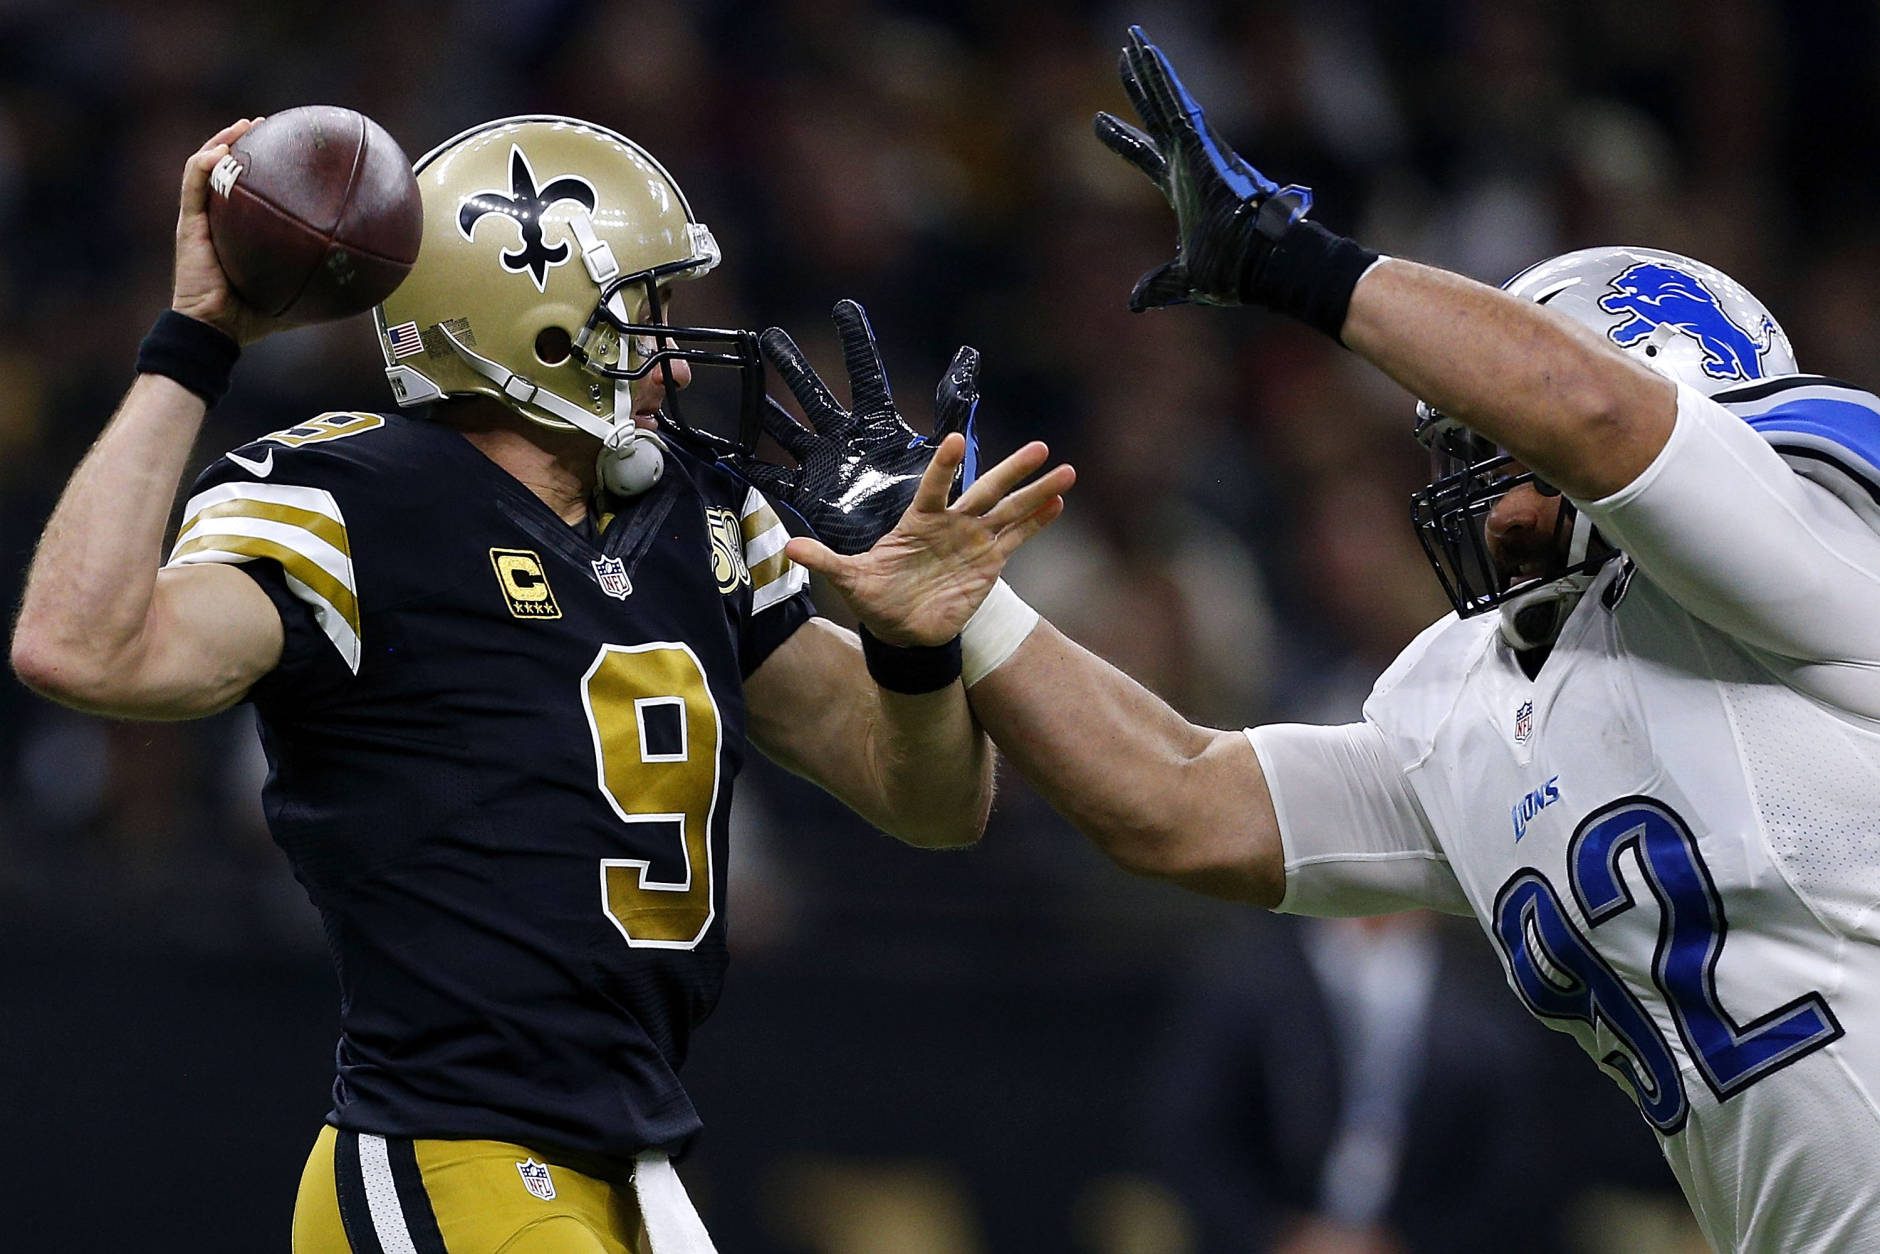 NEW ORLEANS, LA - DECEMBER 04: Haloti Ngata #92 of the Detroit Lions pressures Drew Brees #9 of the New Orleans Saints during the first half of a game at the Mercedes-Benz Superdome on December 4, 2016 in New Orleans, Louisiana.  (Photo by Jonathan Bachman/Getty Images)